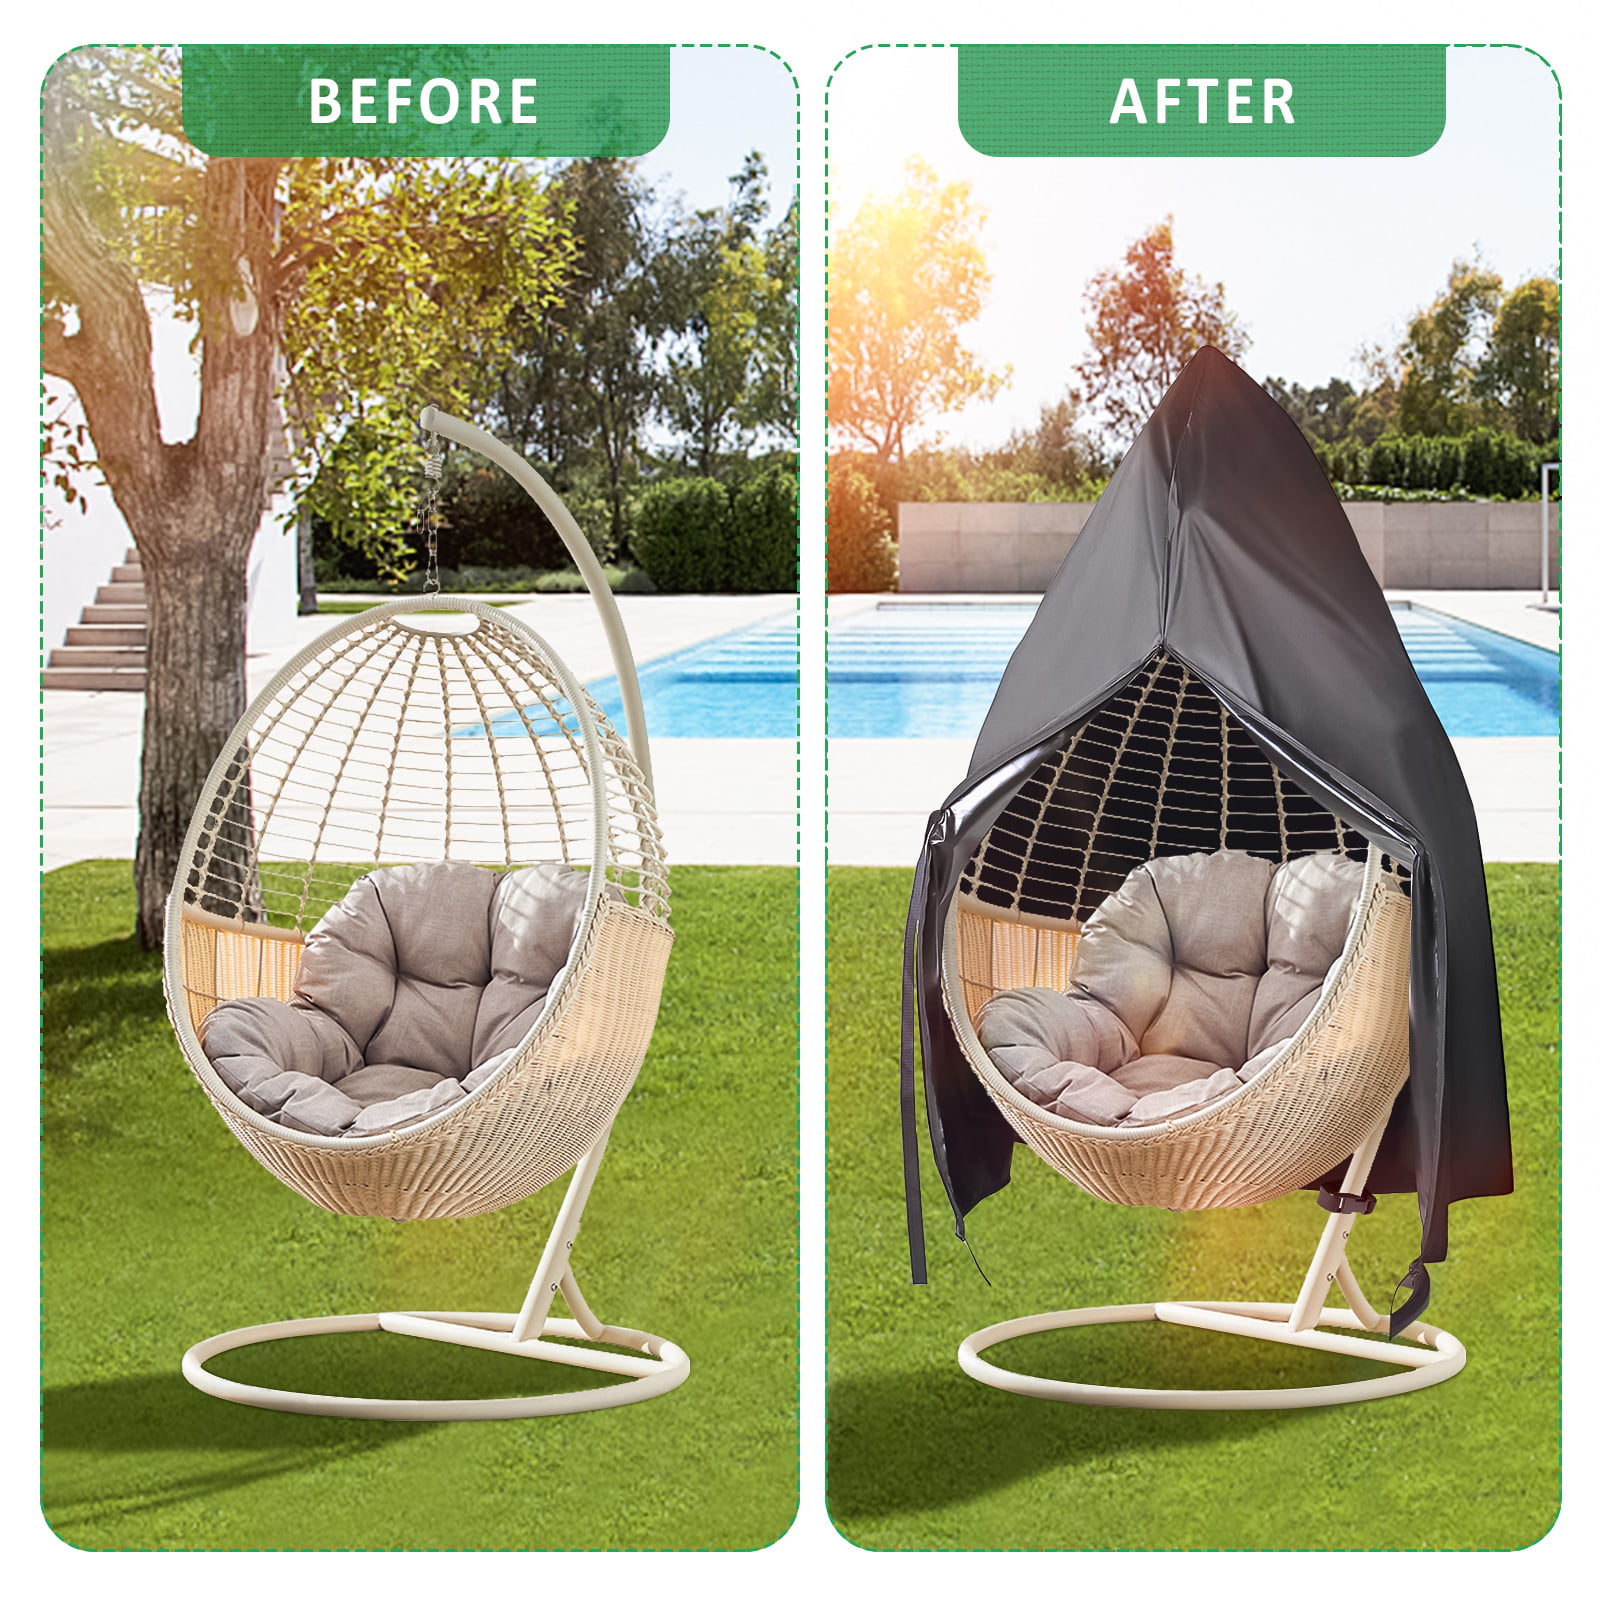 75 x 45, Beige&Coffee Bsmilly Patio Hanging Egg Chair Cover Waterproof Wikcer Egg Swing Chair Cover with Zipper Patio Stand Cover for Outdoor Single Swing Chair 